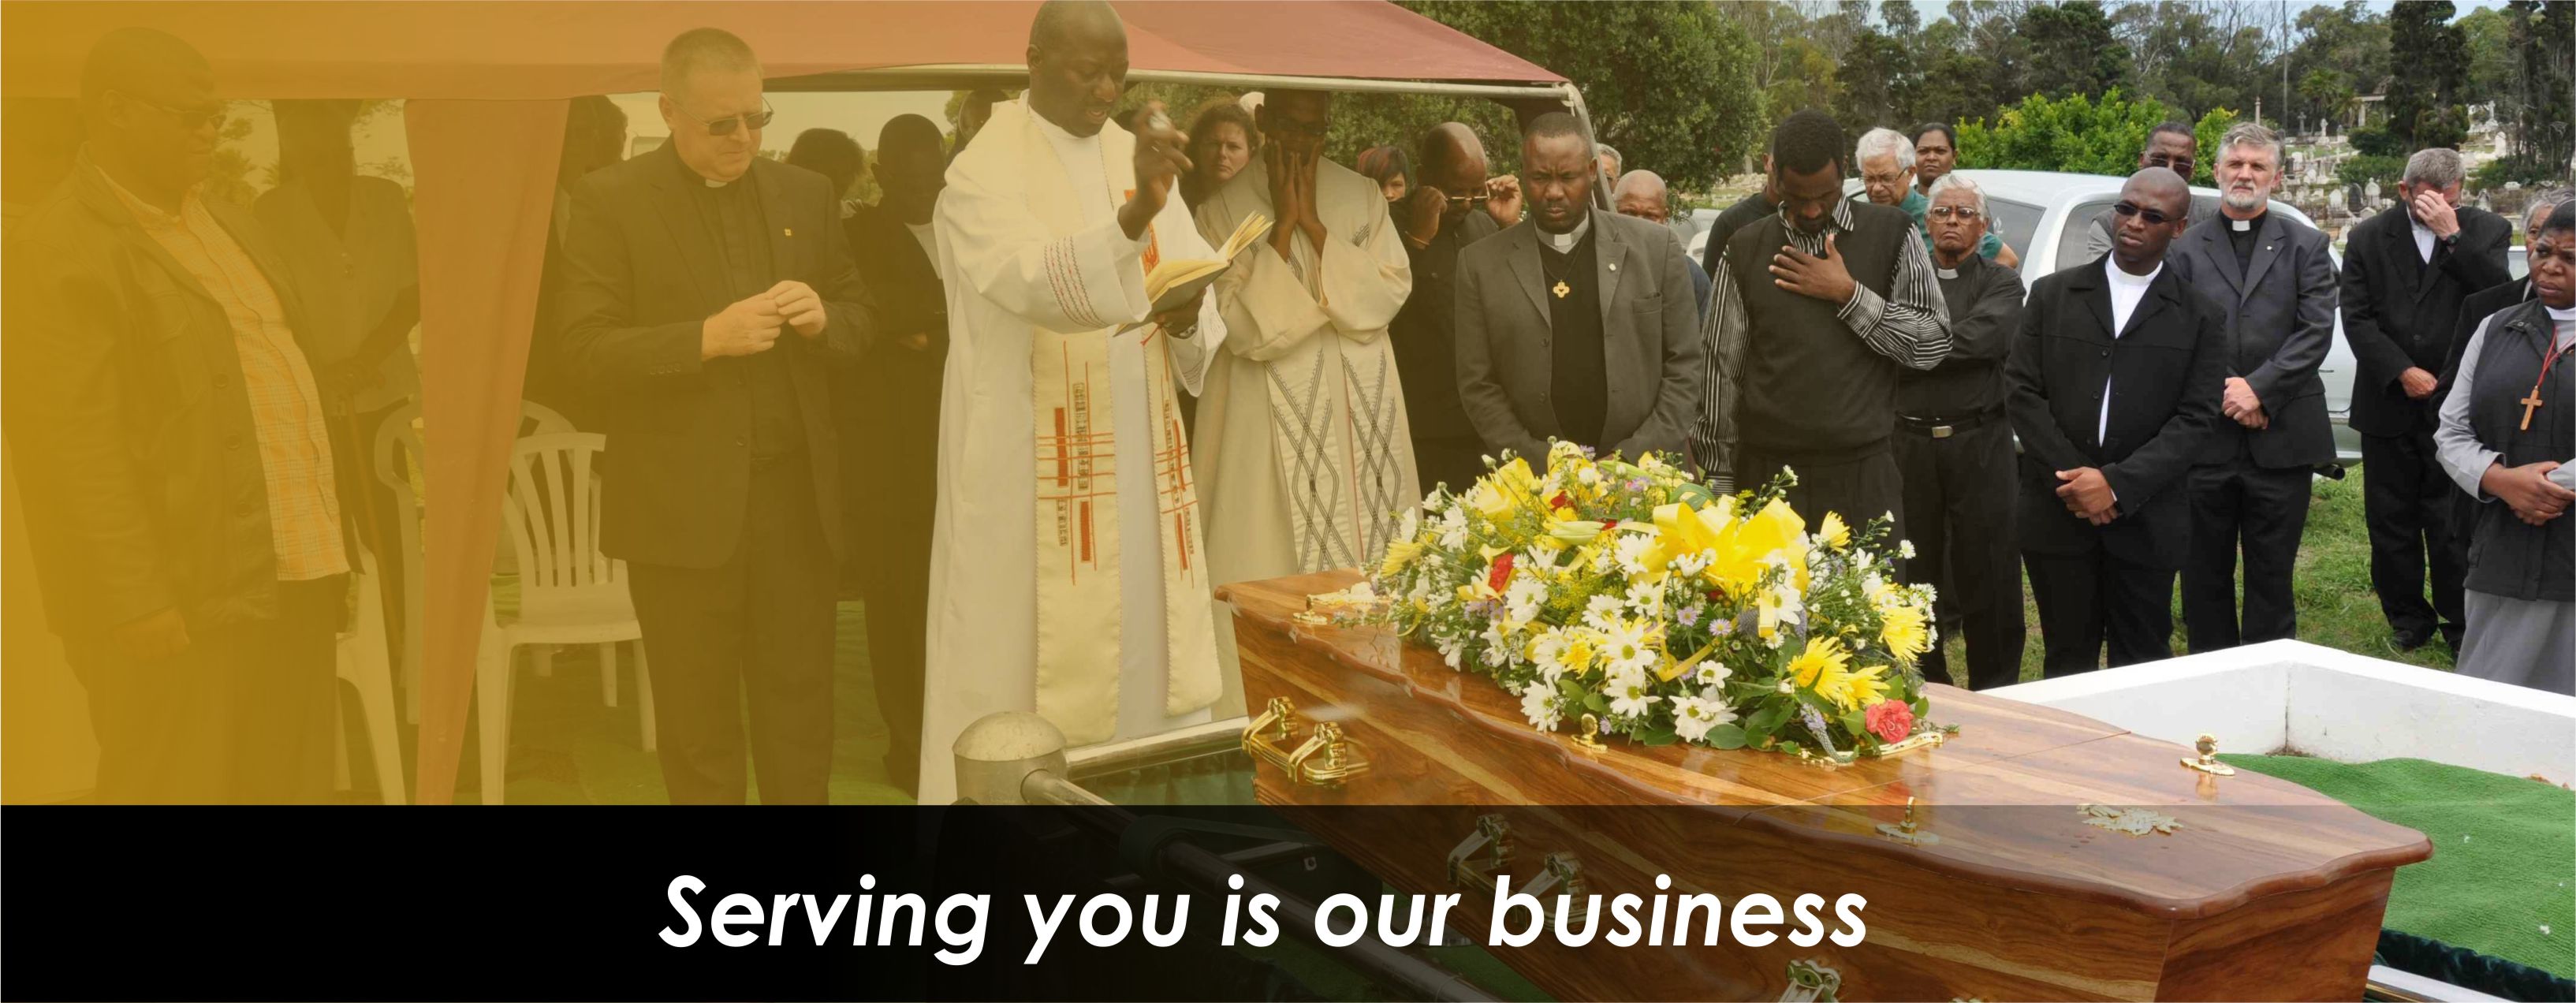 Funeral Services, Best Service:: Choose Ego Funerals3267 x 1272